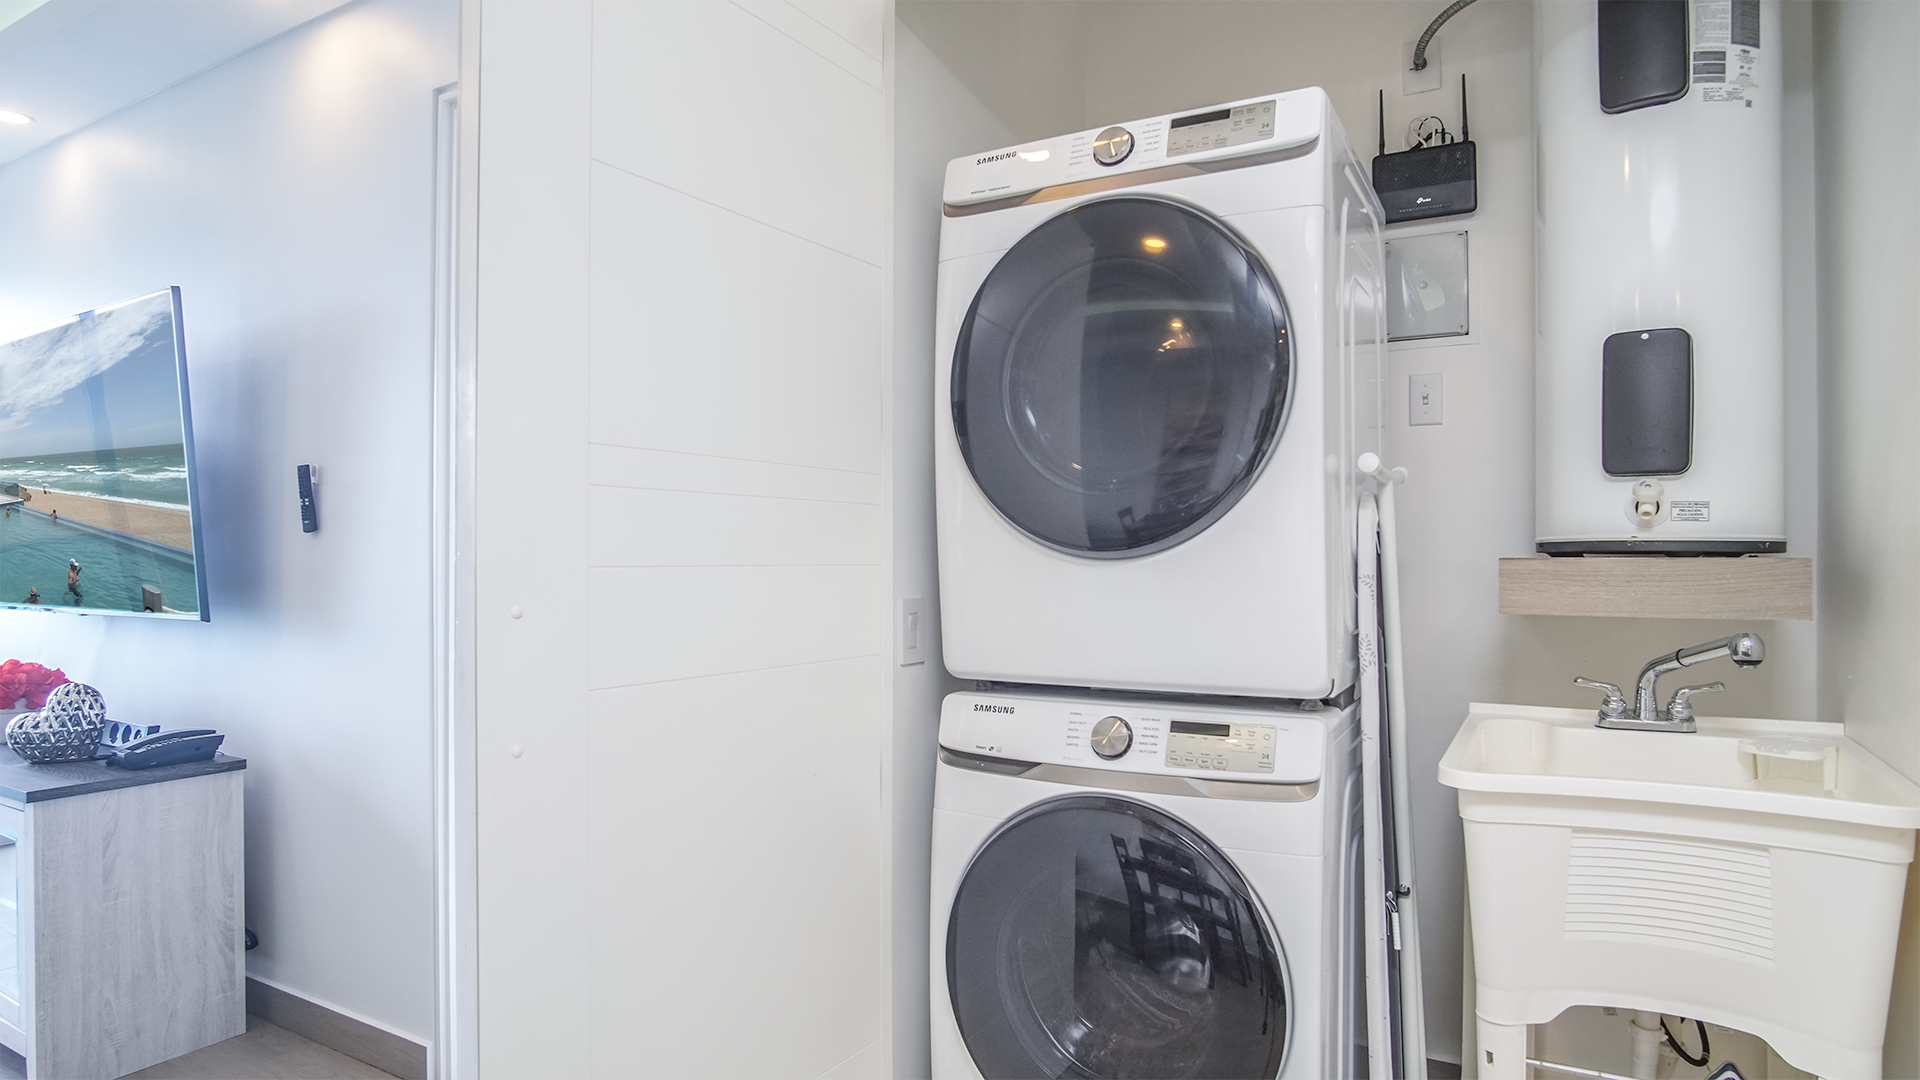 Conveniently located washer and dryer, inside the condo.